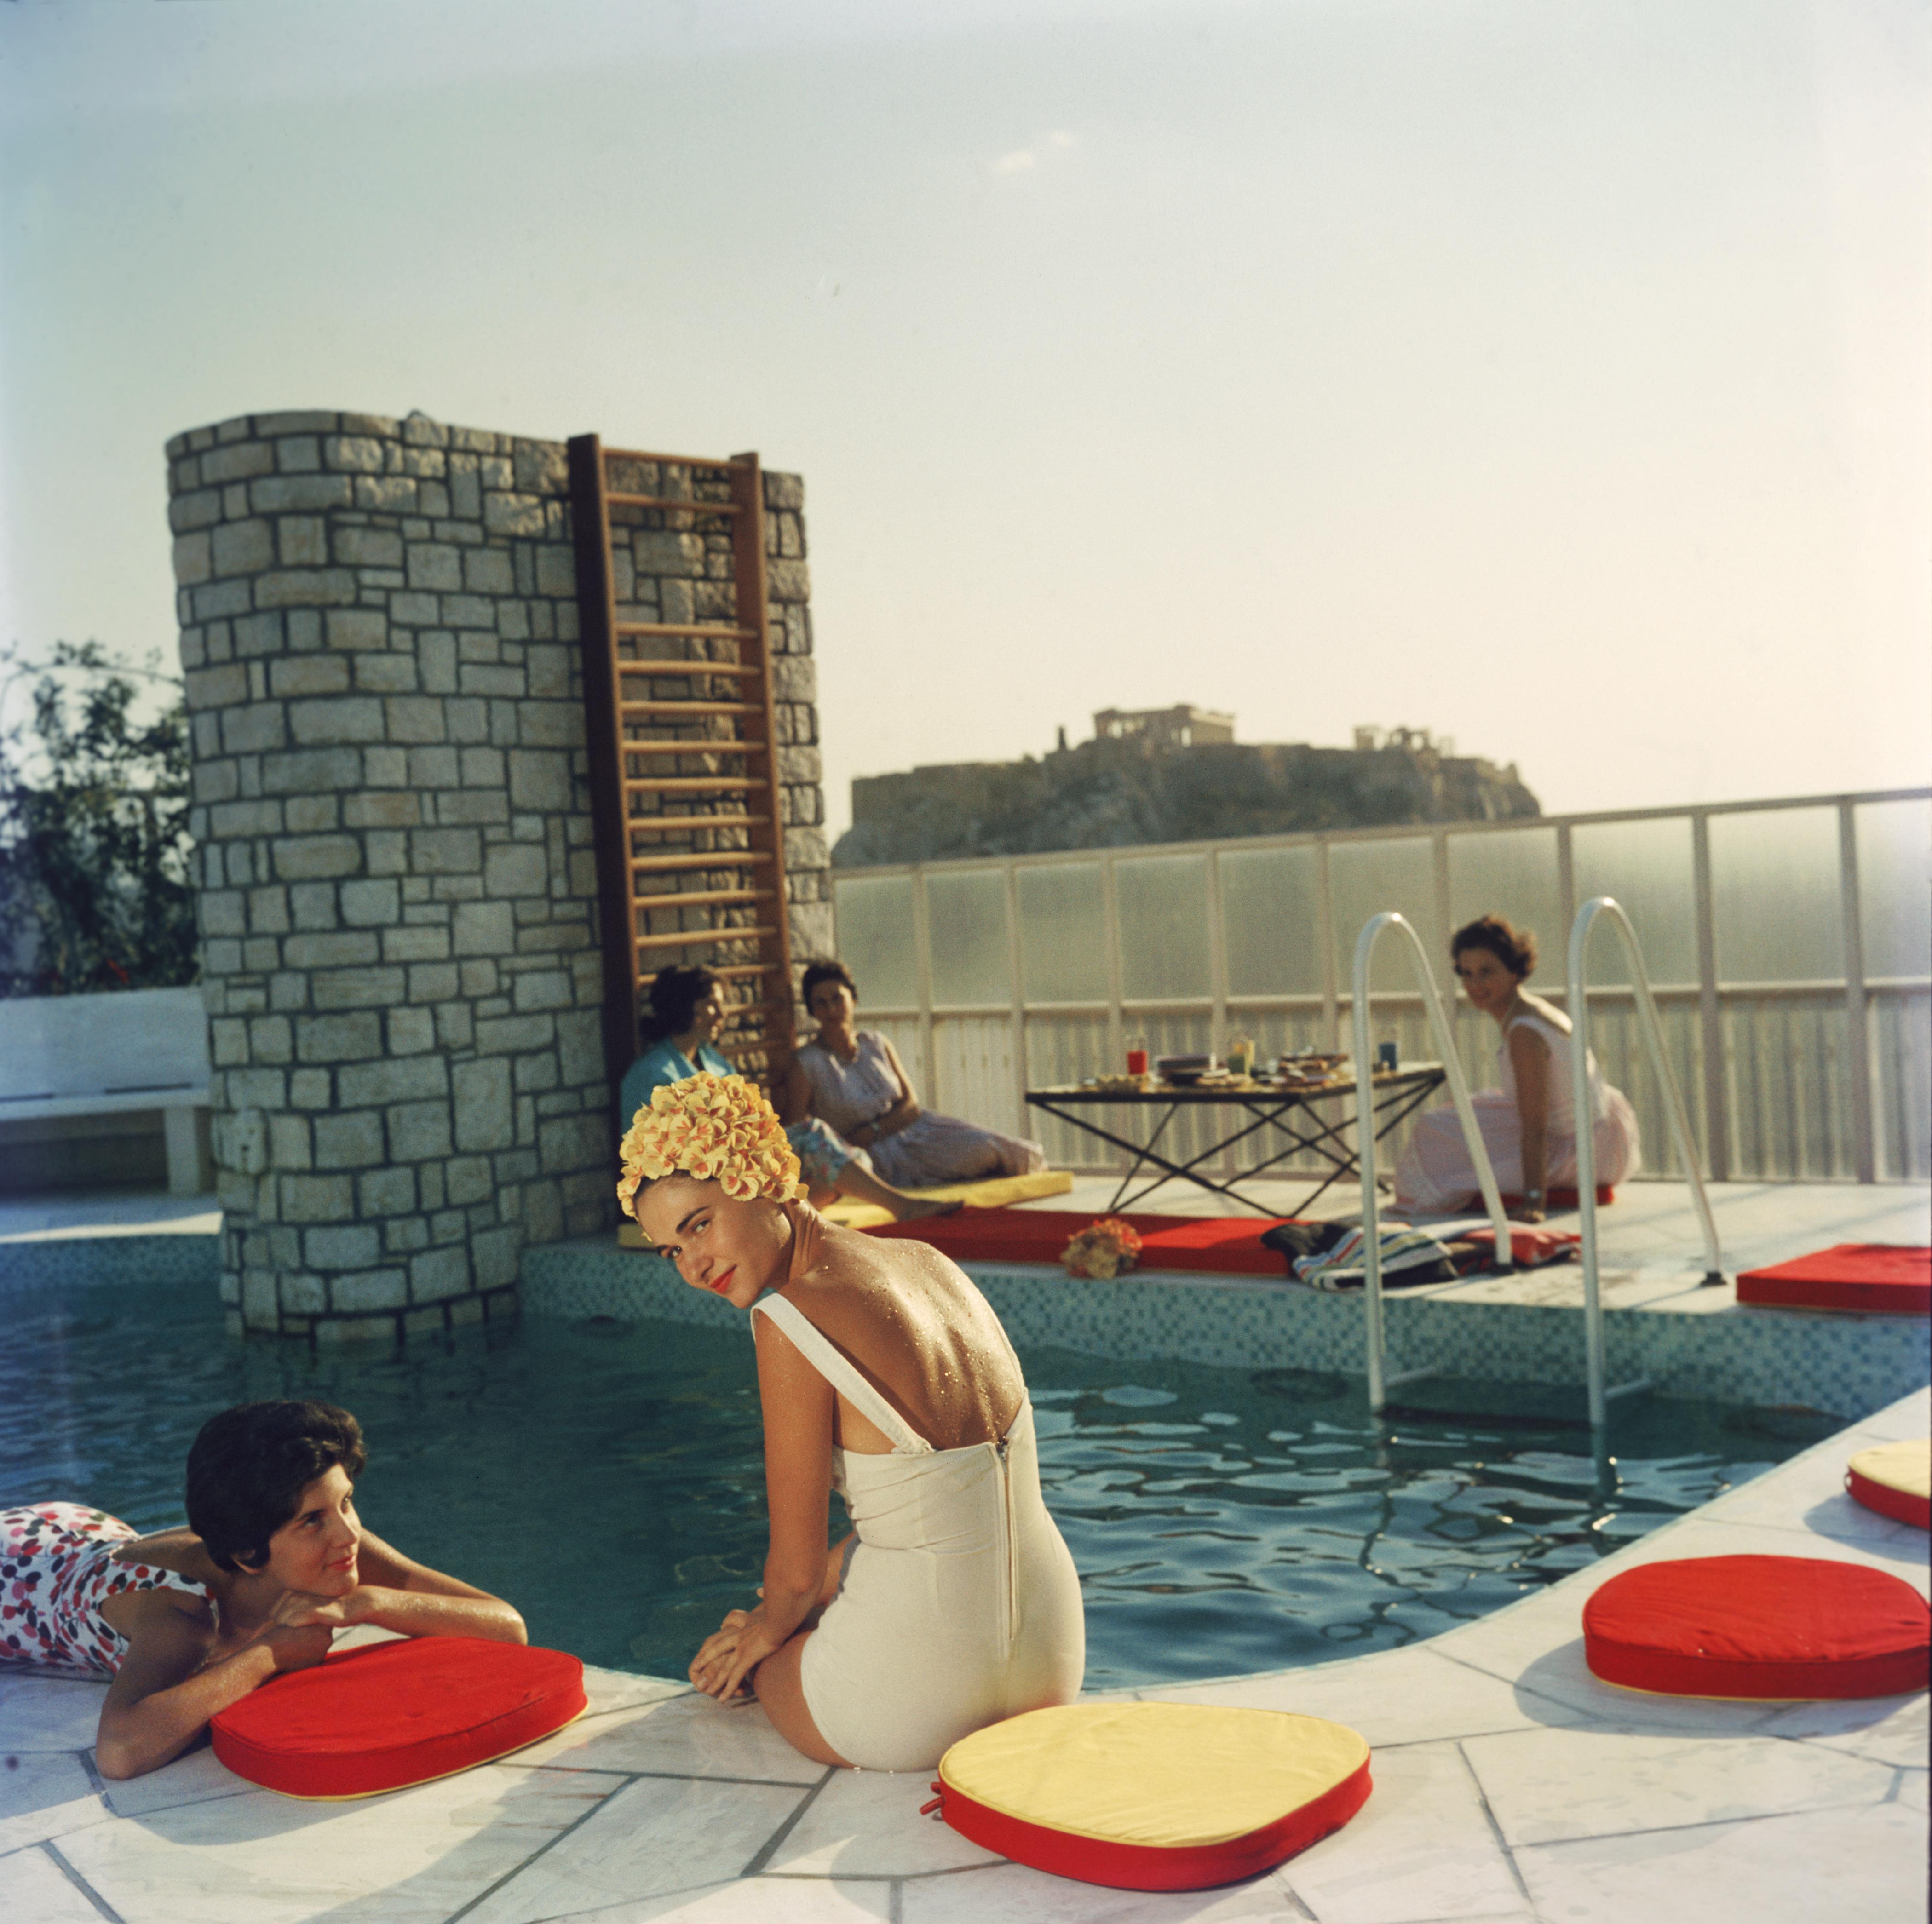 'Penthouse Pool' 1961 Slim Aarons Limited Estate Edition
Young women by the Canellopoulos penthouse pool, Athens, July 1961. 

Chromogenic C print 
Printed this year 
Slim Aarons Estate Edition 
Produced utilising the only original transparency or